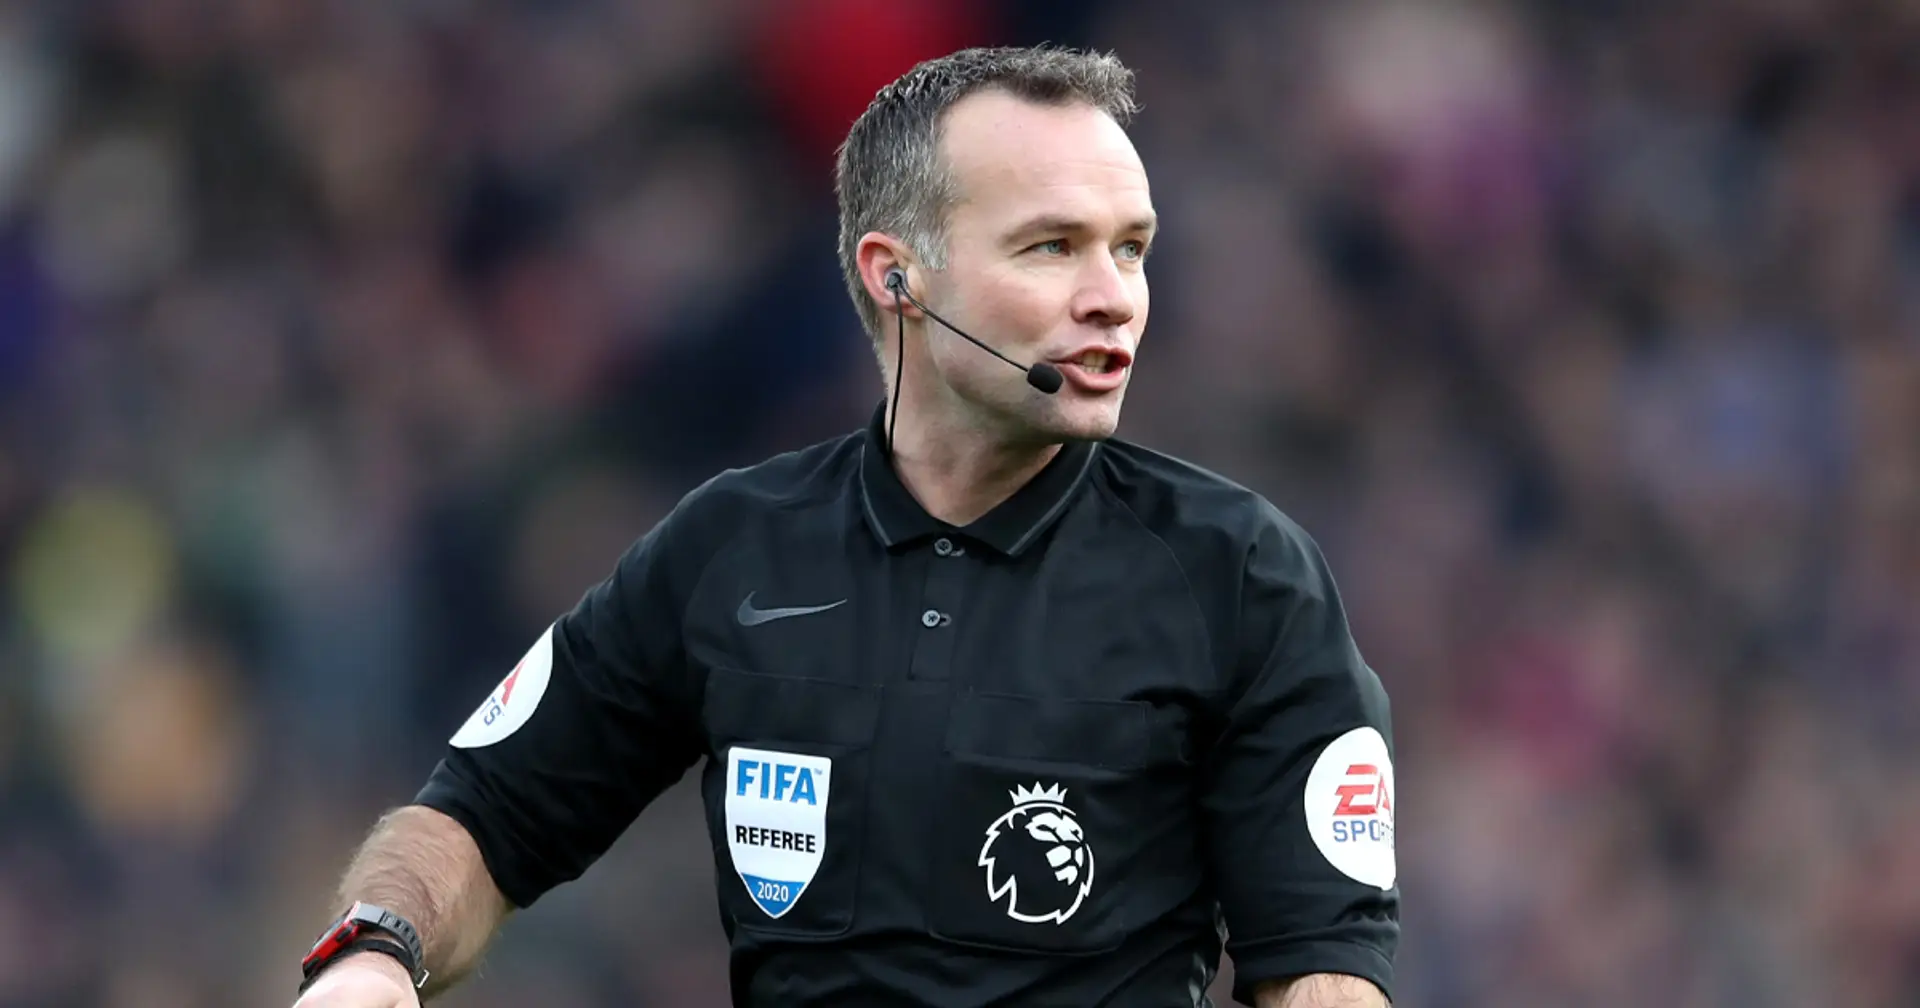 'That's it. I'm doing my badges': Referee for Man United clash is confirmed - and Liverpool fans are outraged